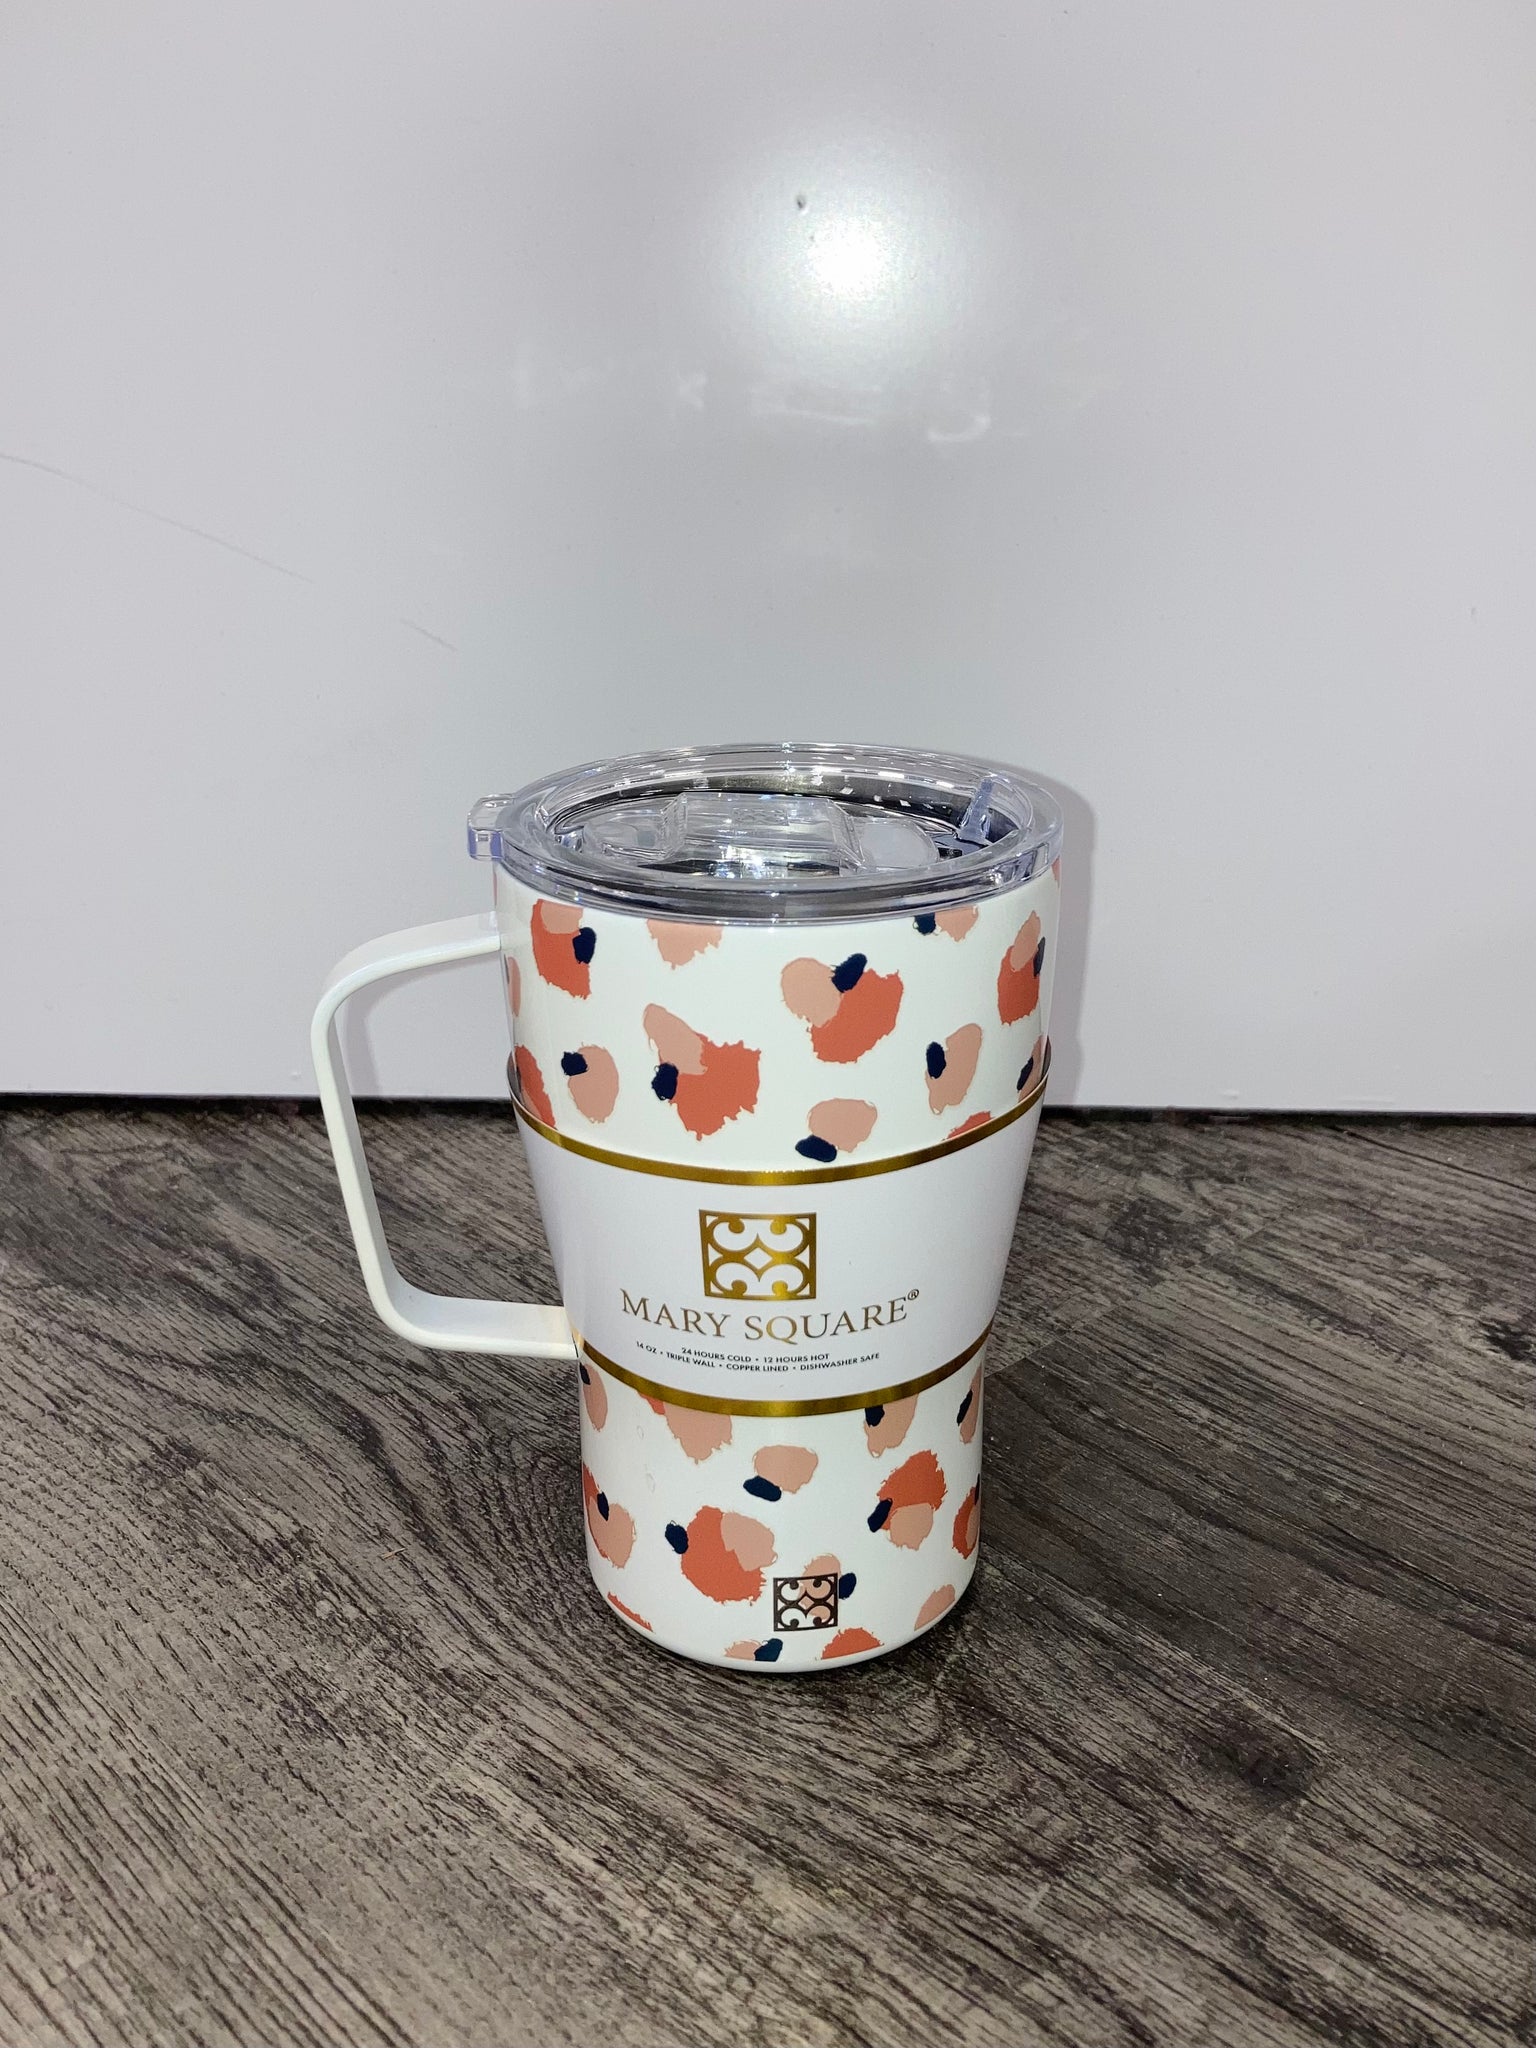 Mary Square- "Prowl Play" Tumbler Collection